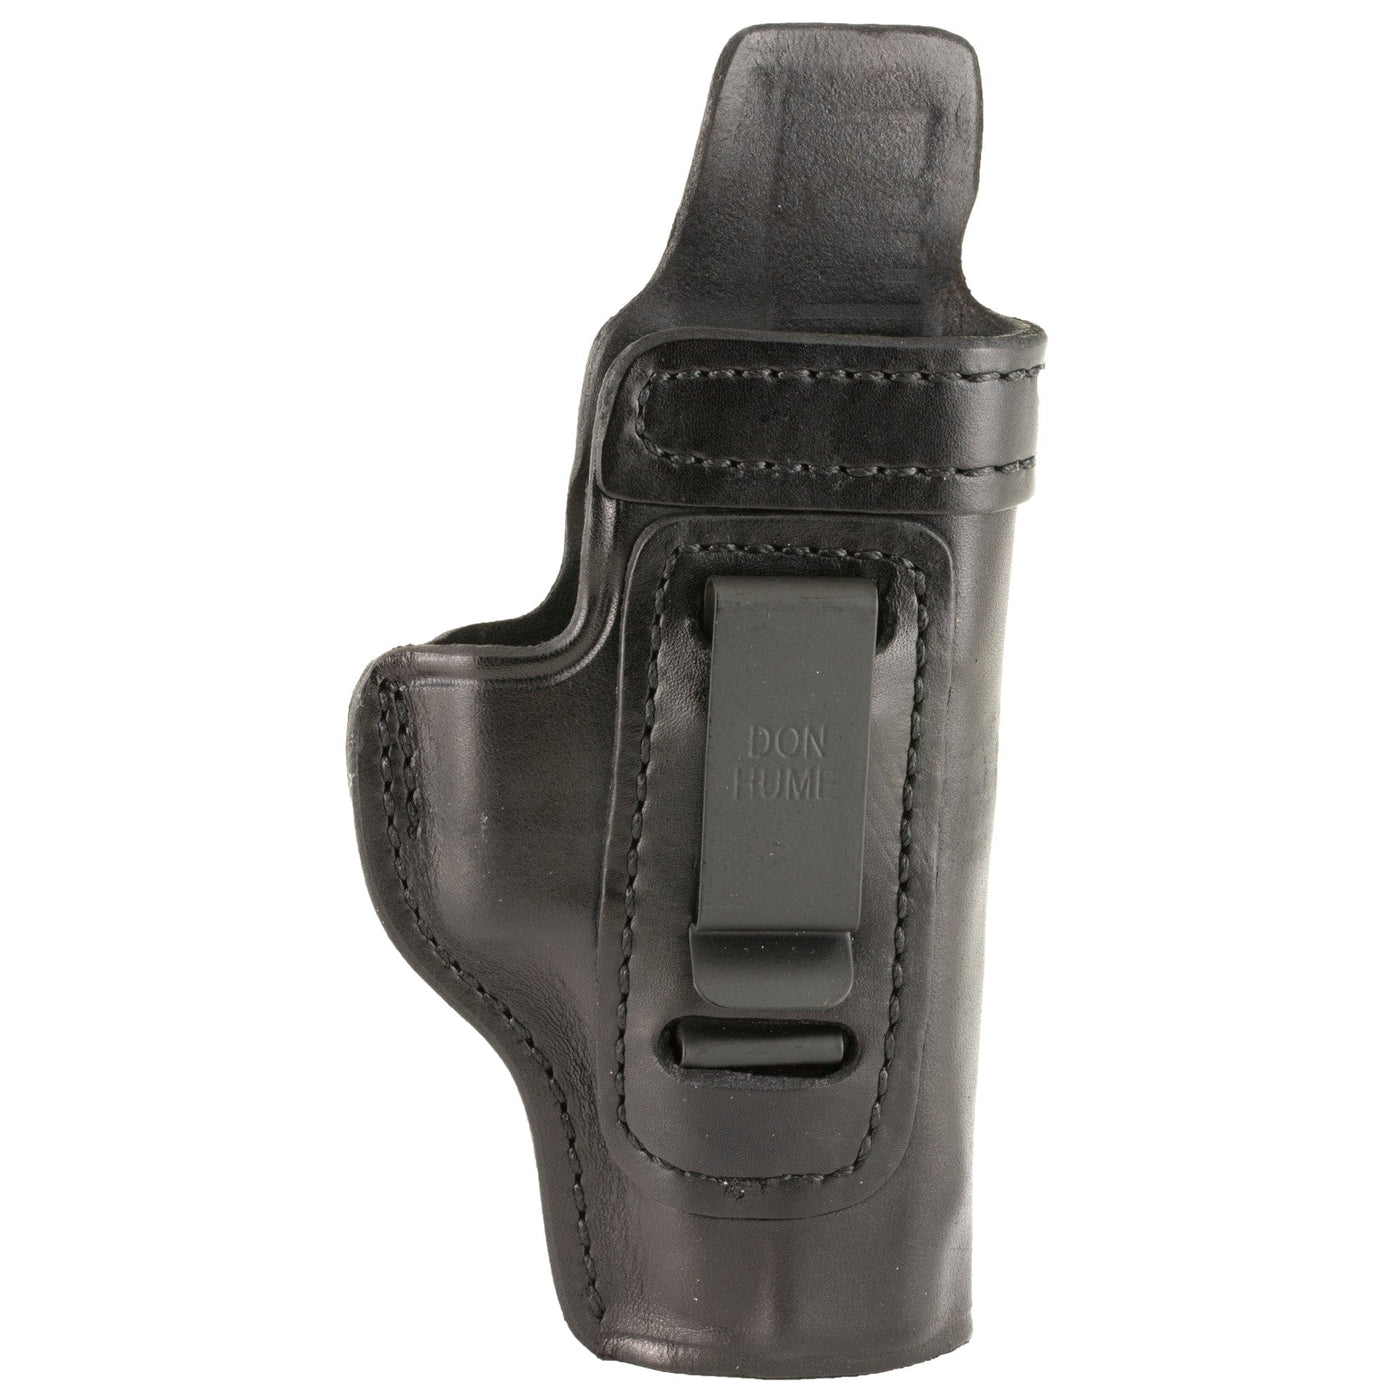 Don Hume D Hume H715-m 36-4 For Glk 19 Bk Rh Holsters